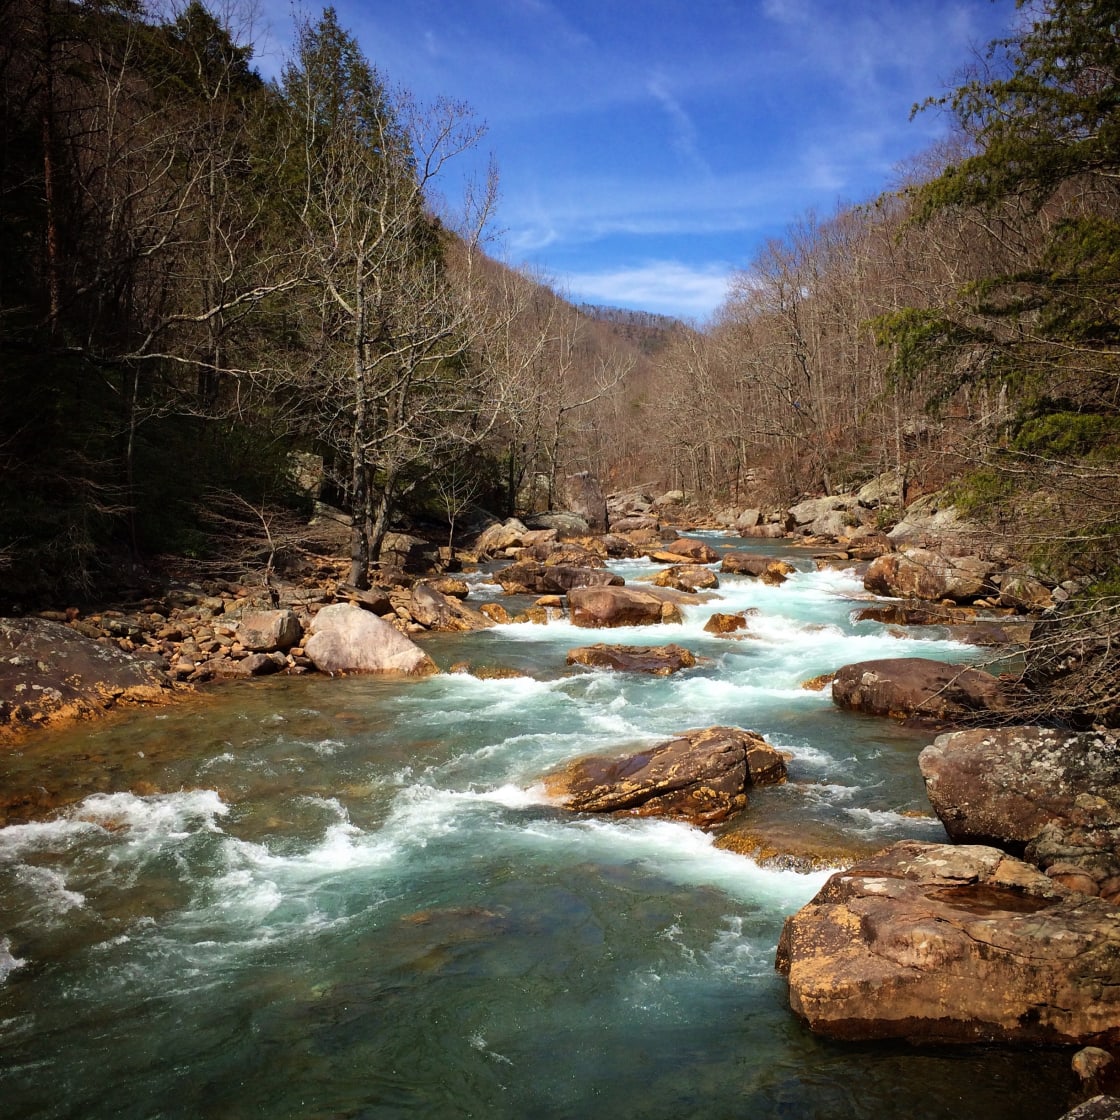 Be sure to check out North Chickamuaga Creek Gorge! 